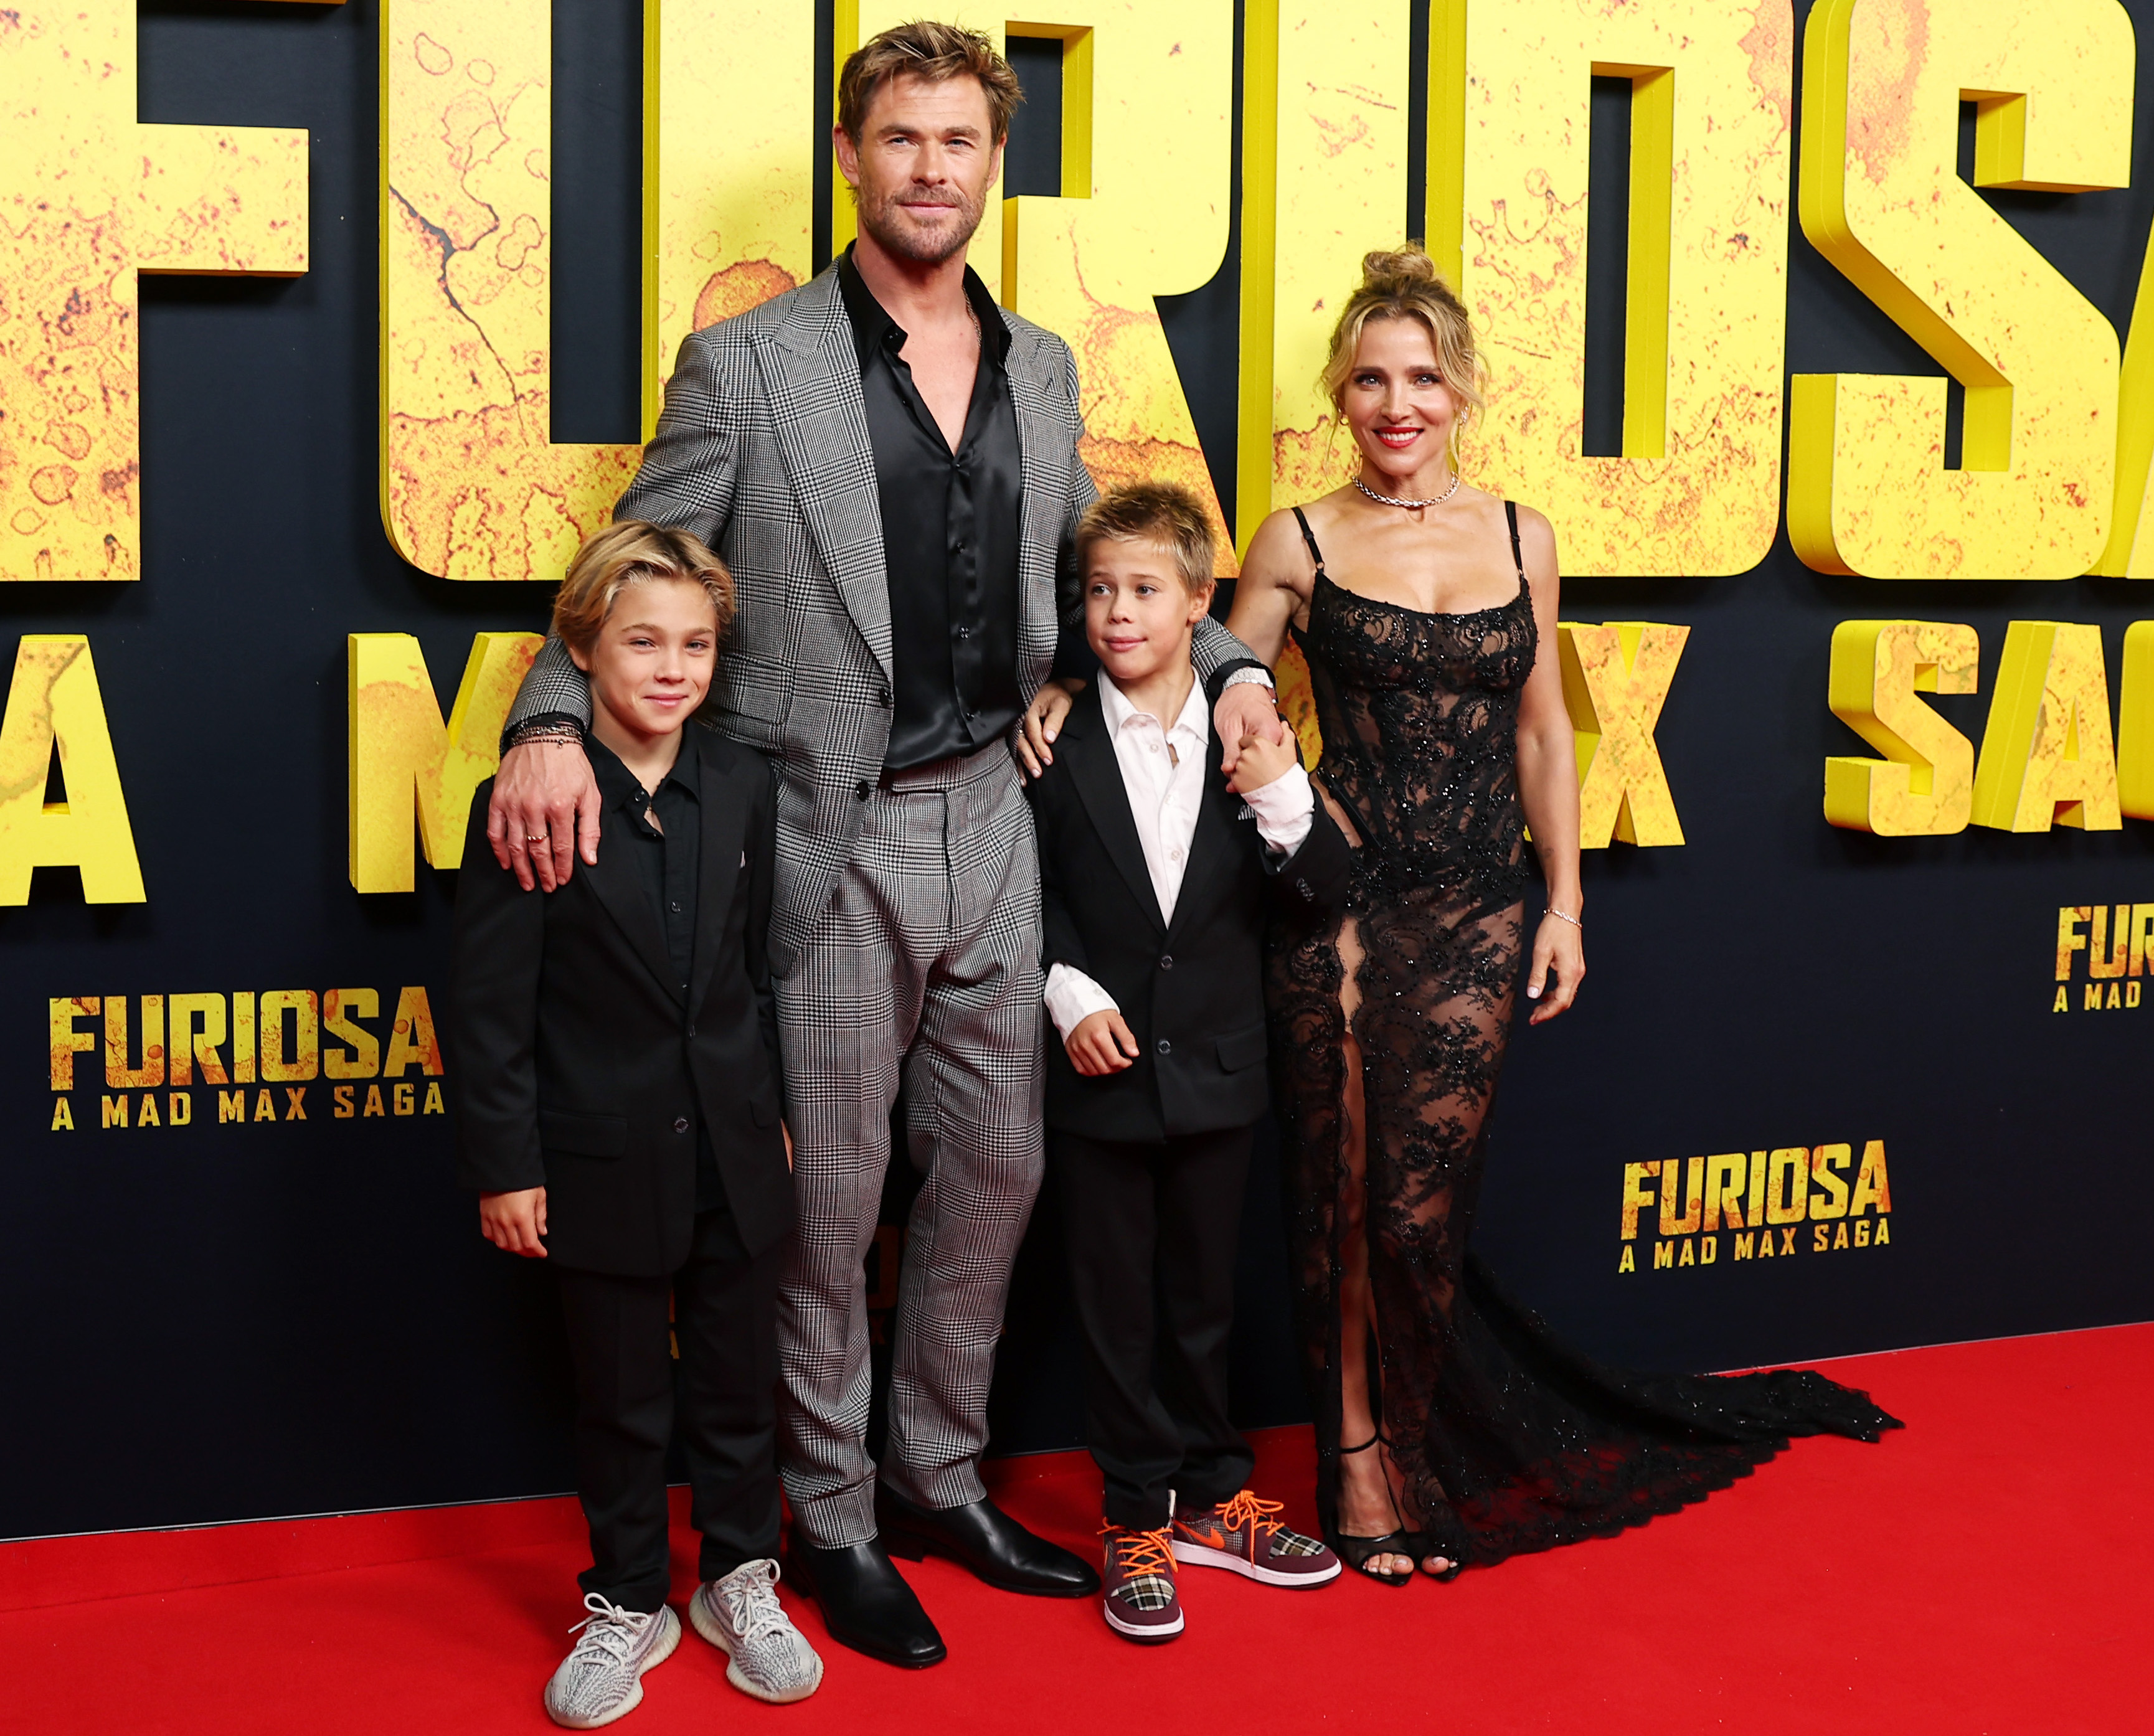 Chris Hemsworth, Elsa Pataky, and twin sons make rare red carpet appearance